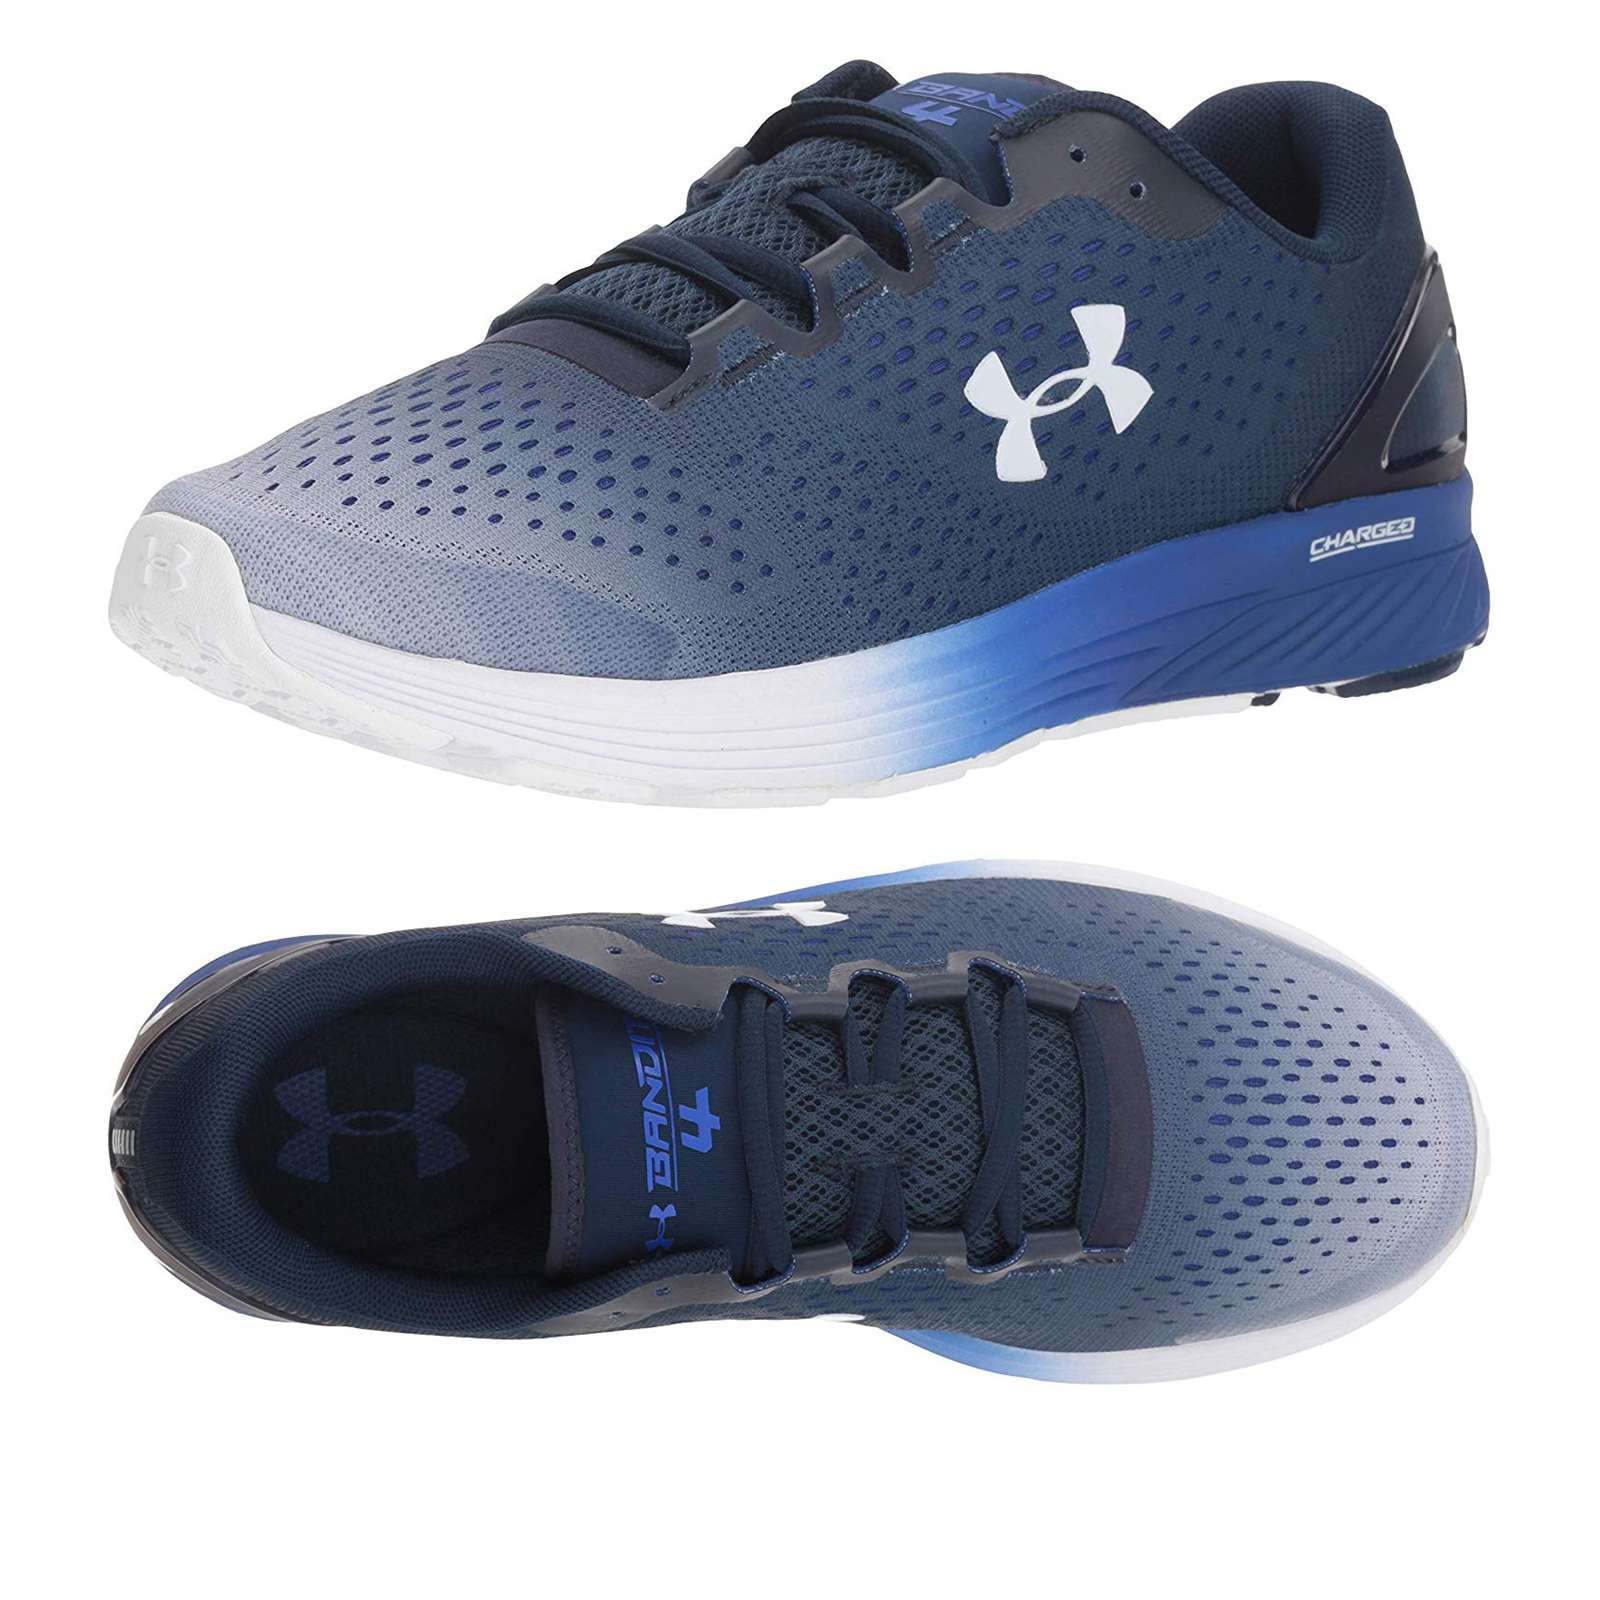 Navy NEW UNDER ARMOUR Charged Bandit 4 Men's Athletic Running Training Shoe 